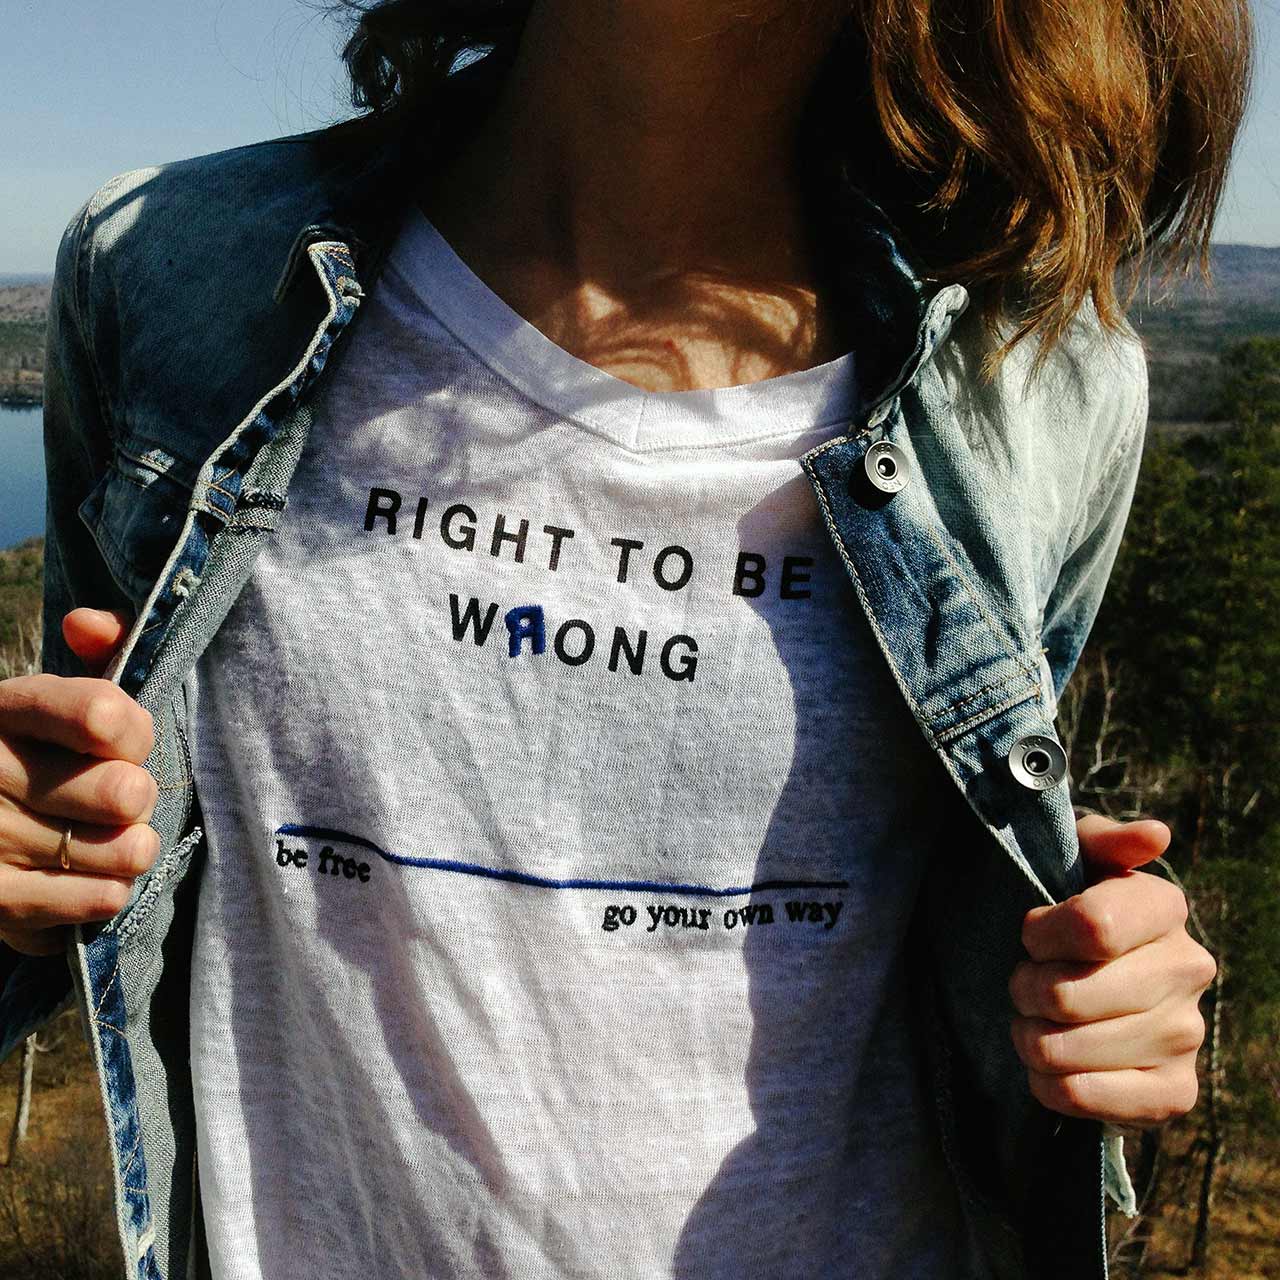 Right to be wrong